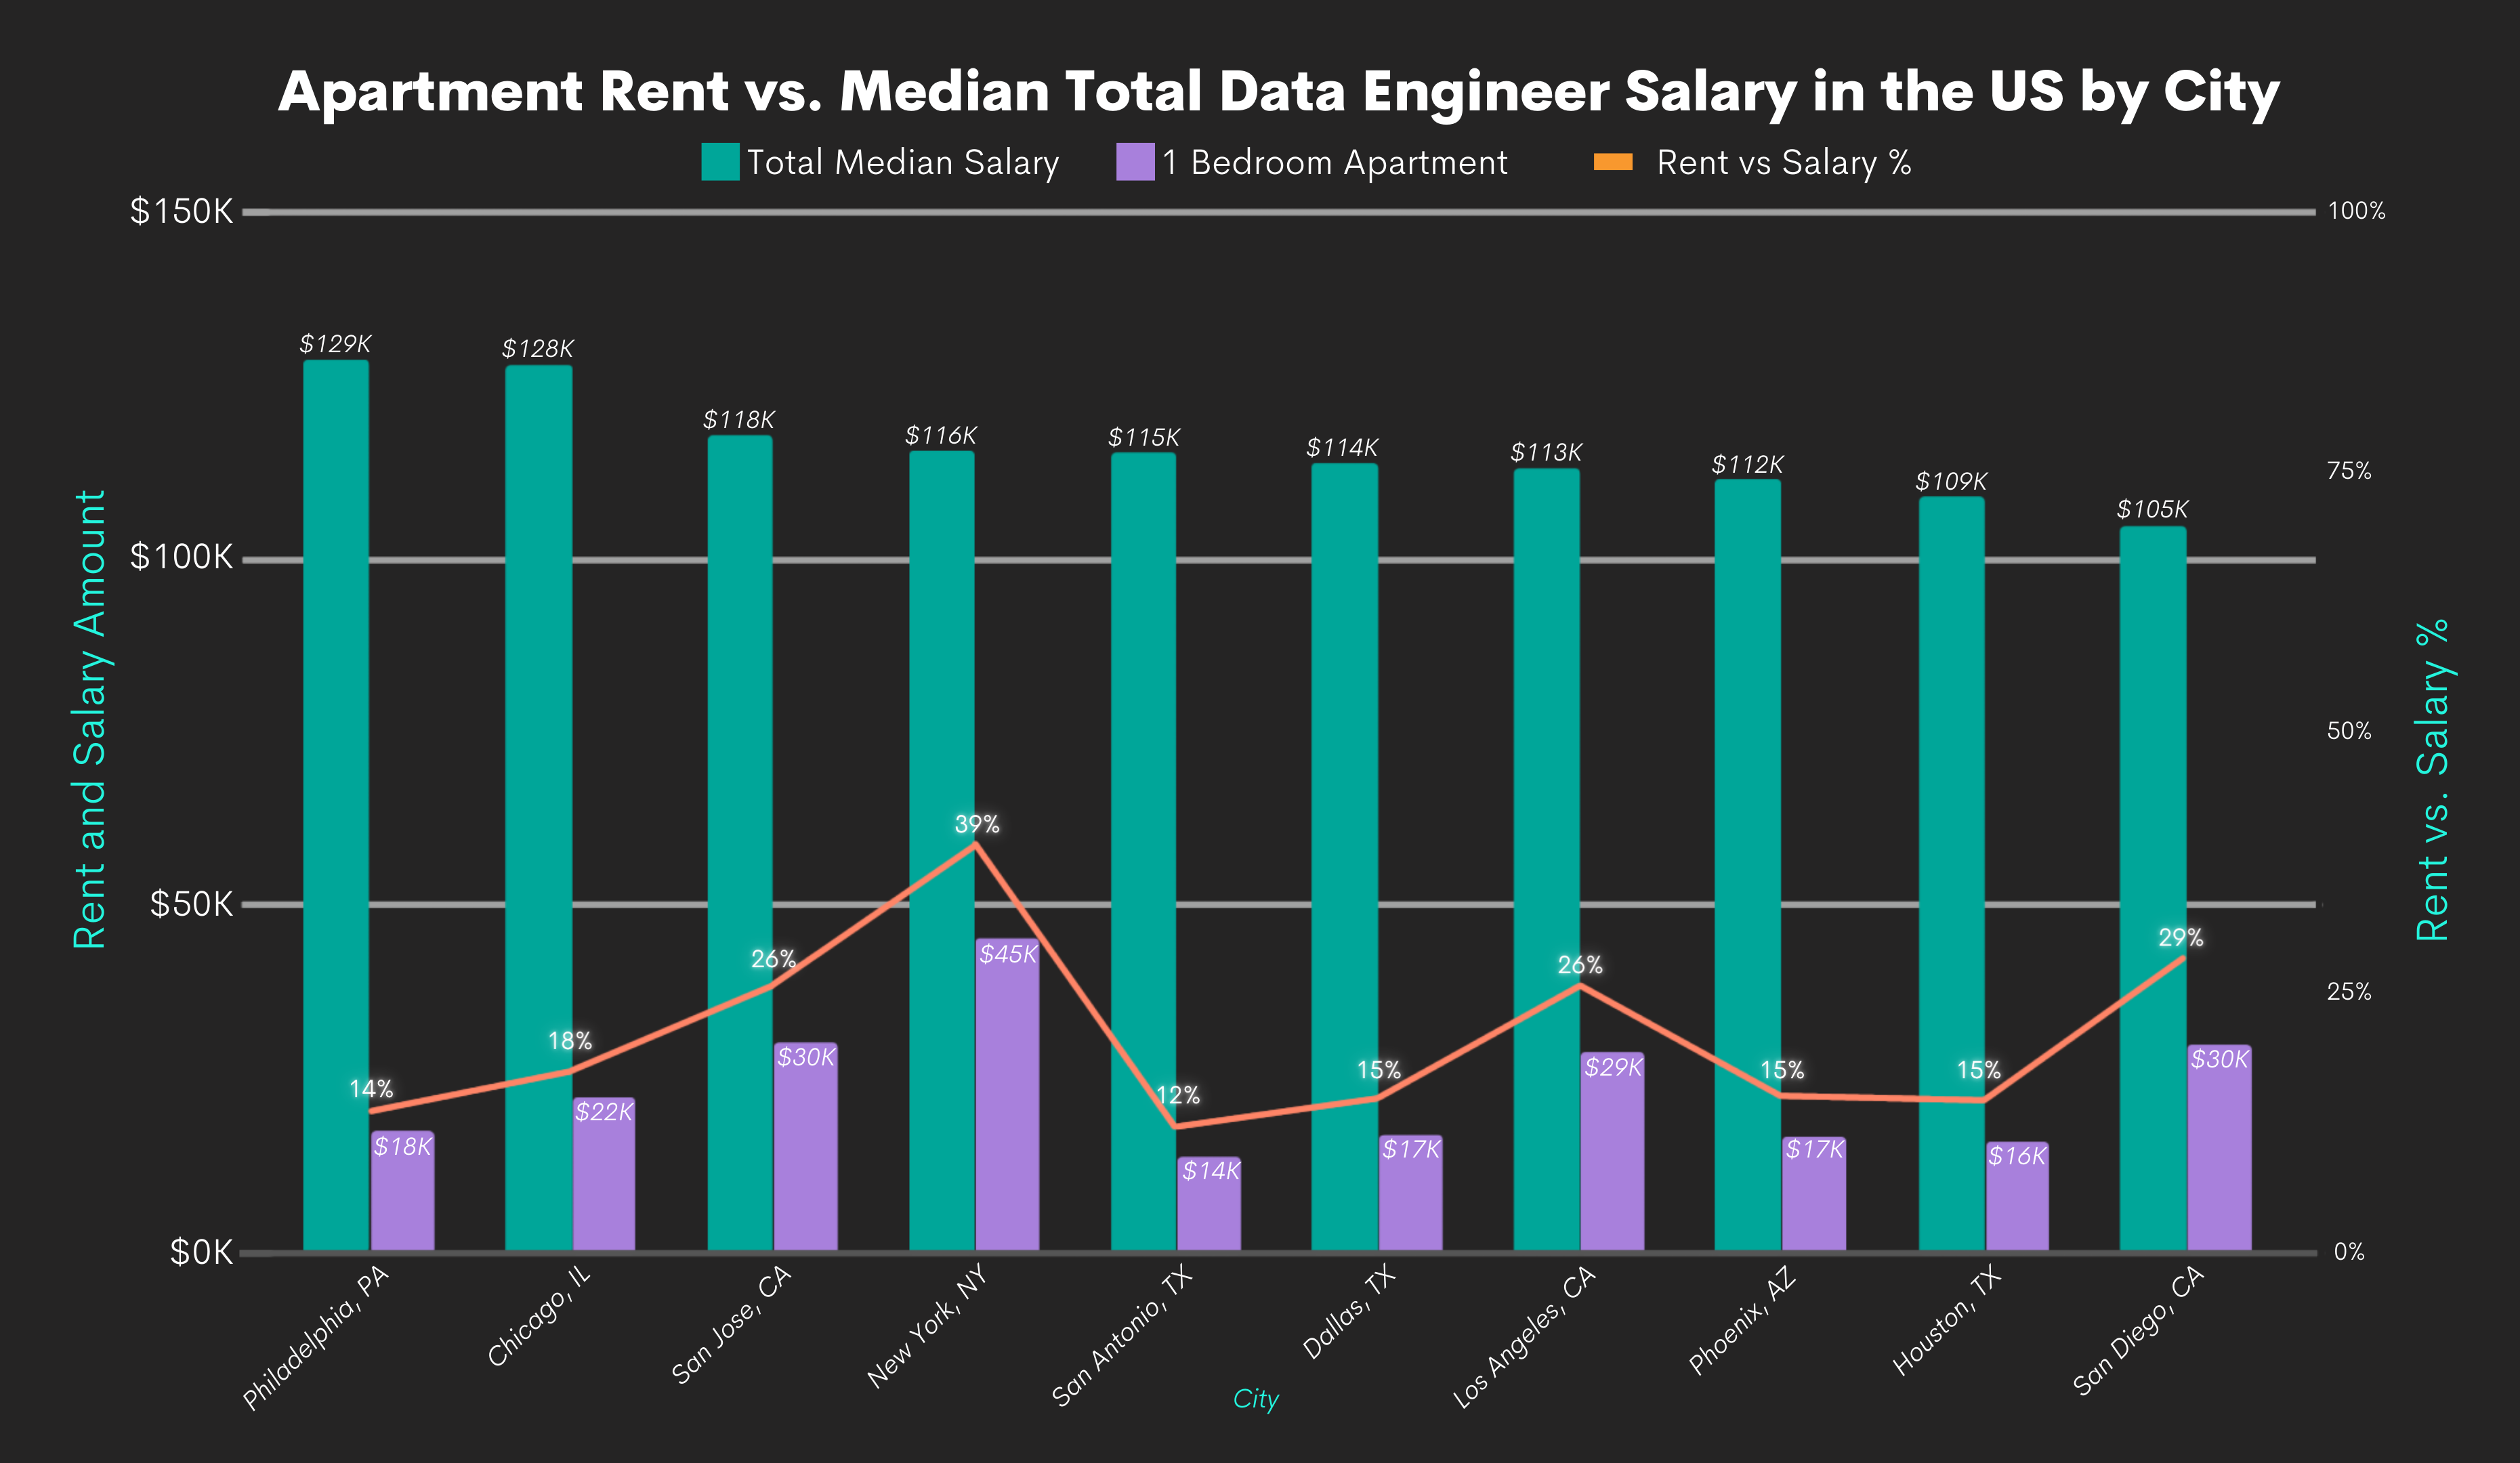 Apartment Rent vs Data Engineer Salaries by City